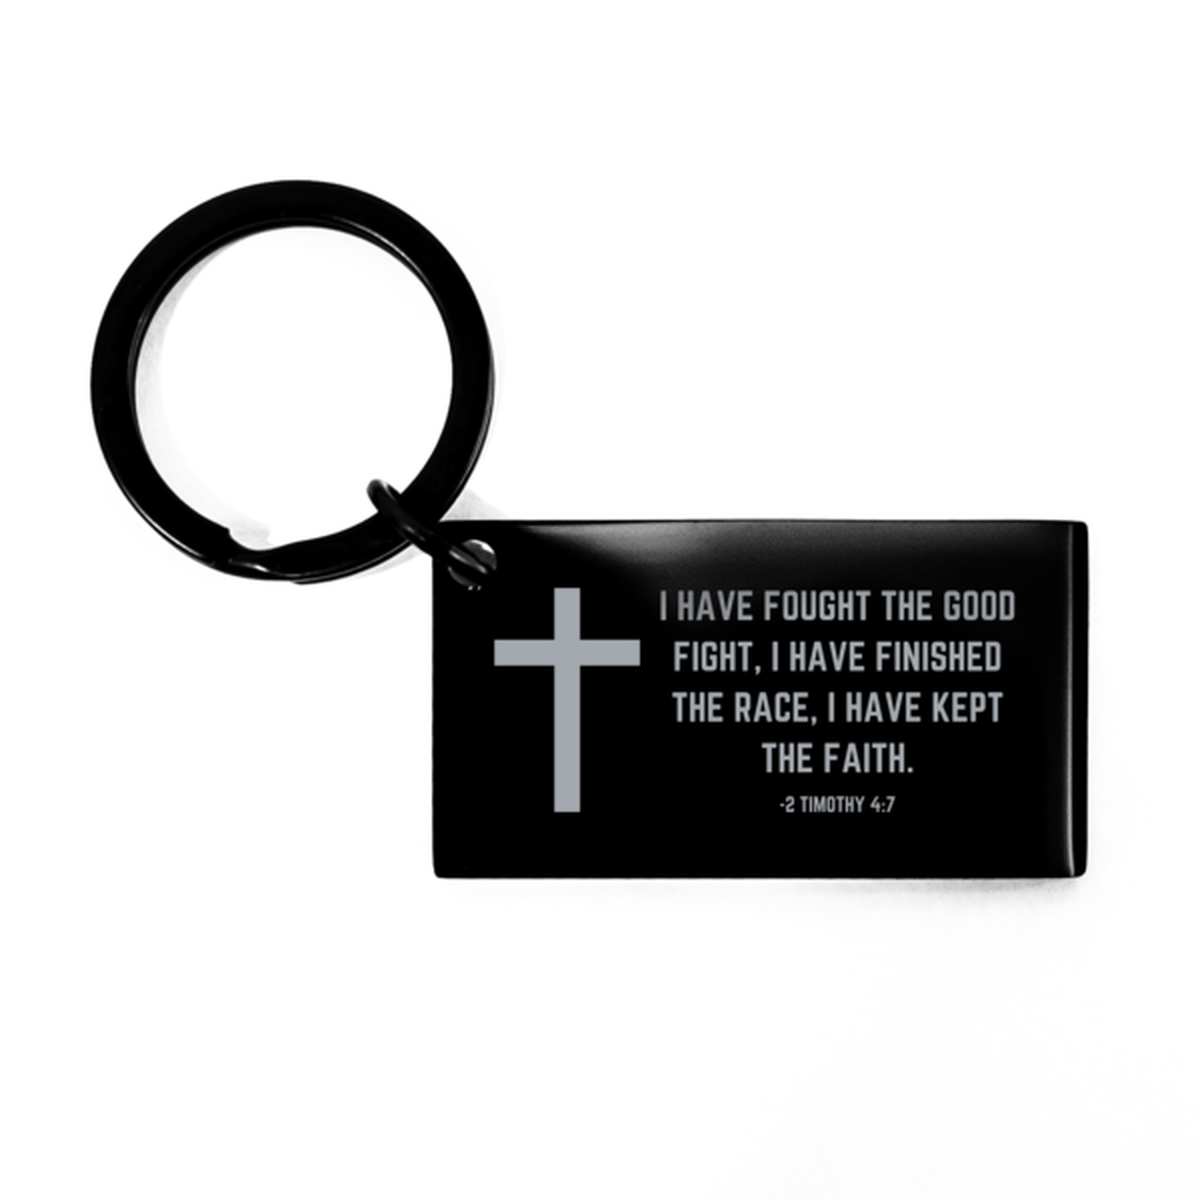 Baptism Gifts For Teenage Boys Girls, Christian Bible Verse Black Keychain, I have fought the good fight, Confirmation Gifts, Bible Verse Keyring for Son, Godson, Grandson, Nephew